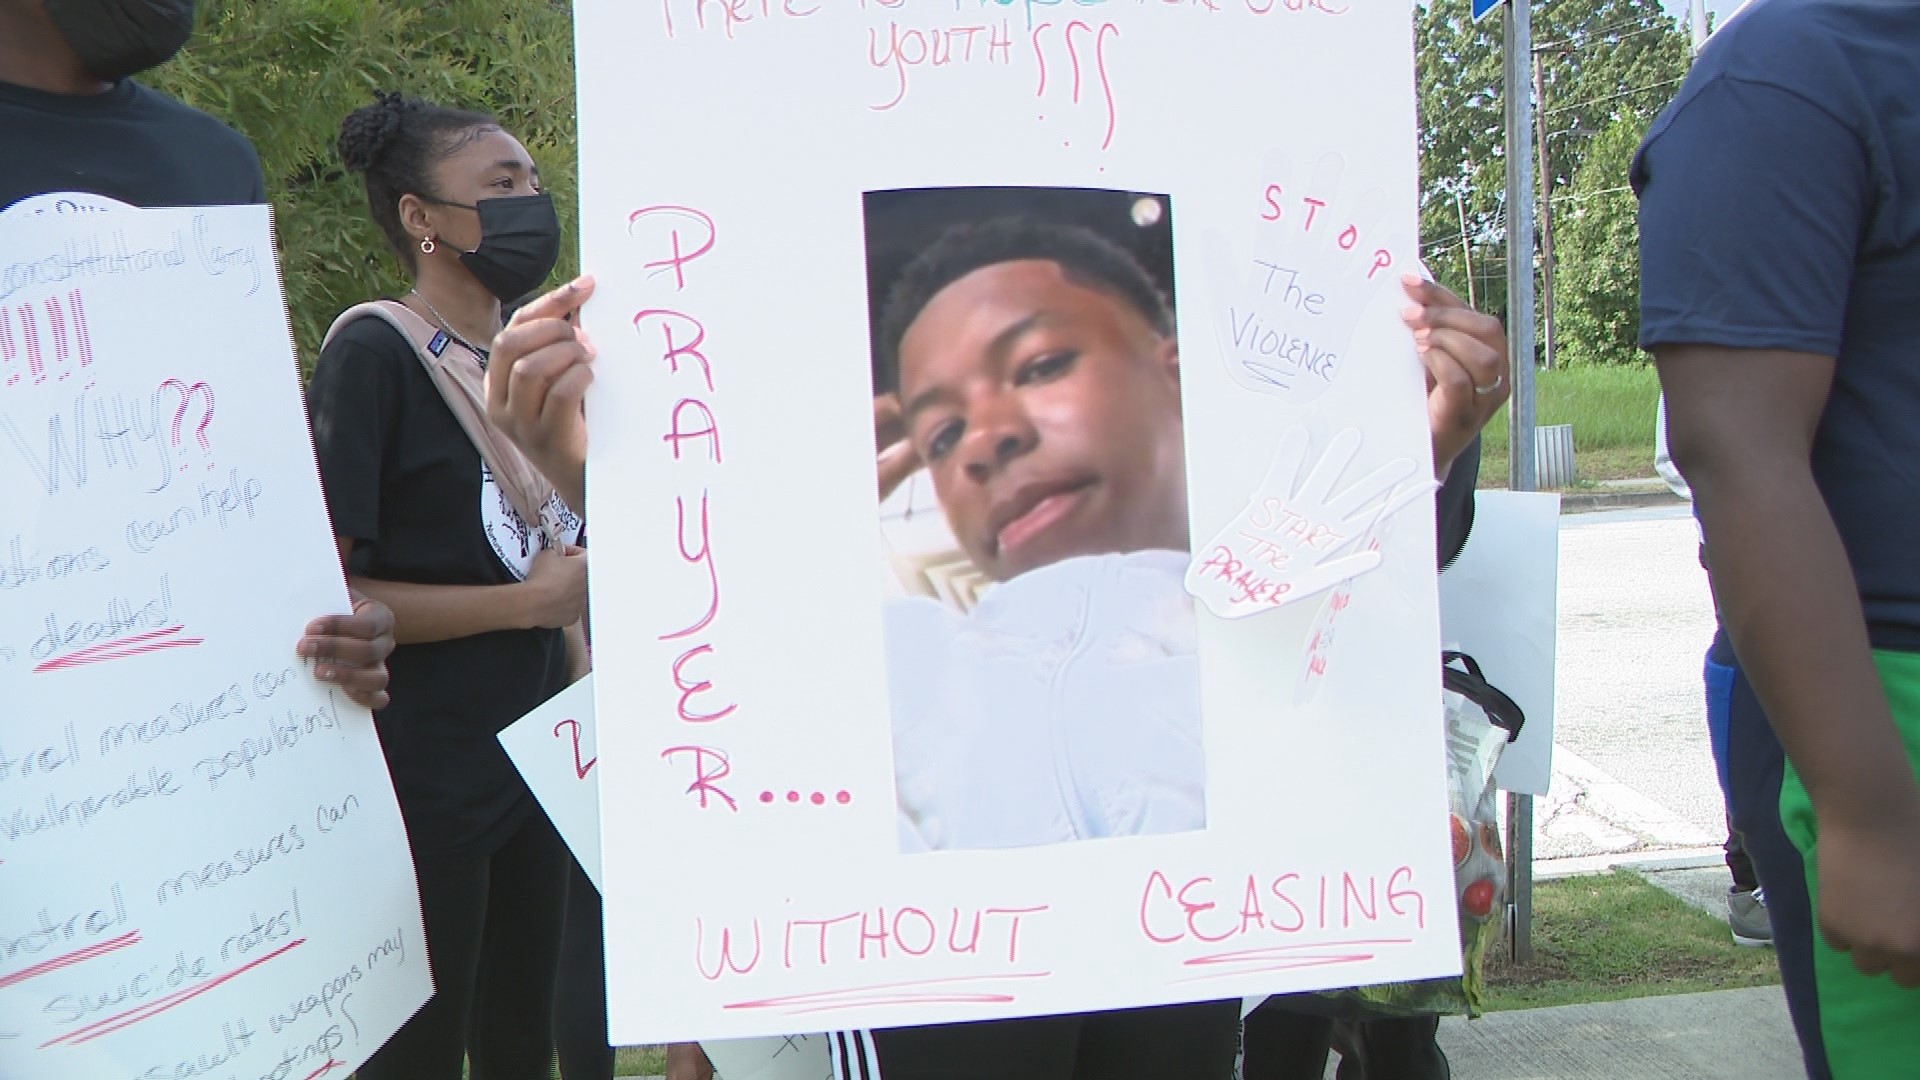 A group of activists, including mothers who lost their children to violence, gathered at the Juvenile Court to kick off the march to Cleophs Johnson Park.